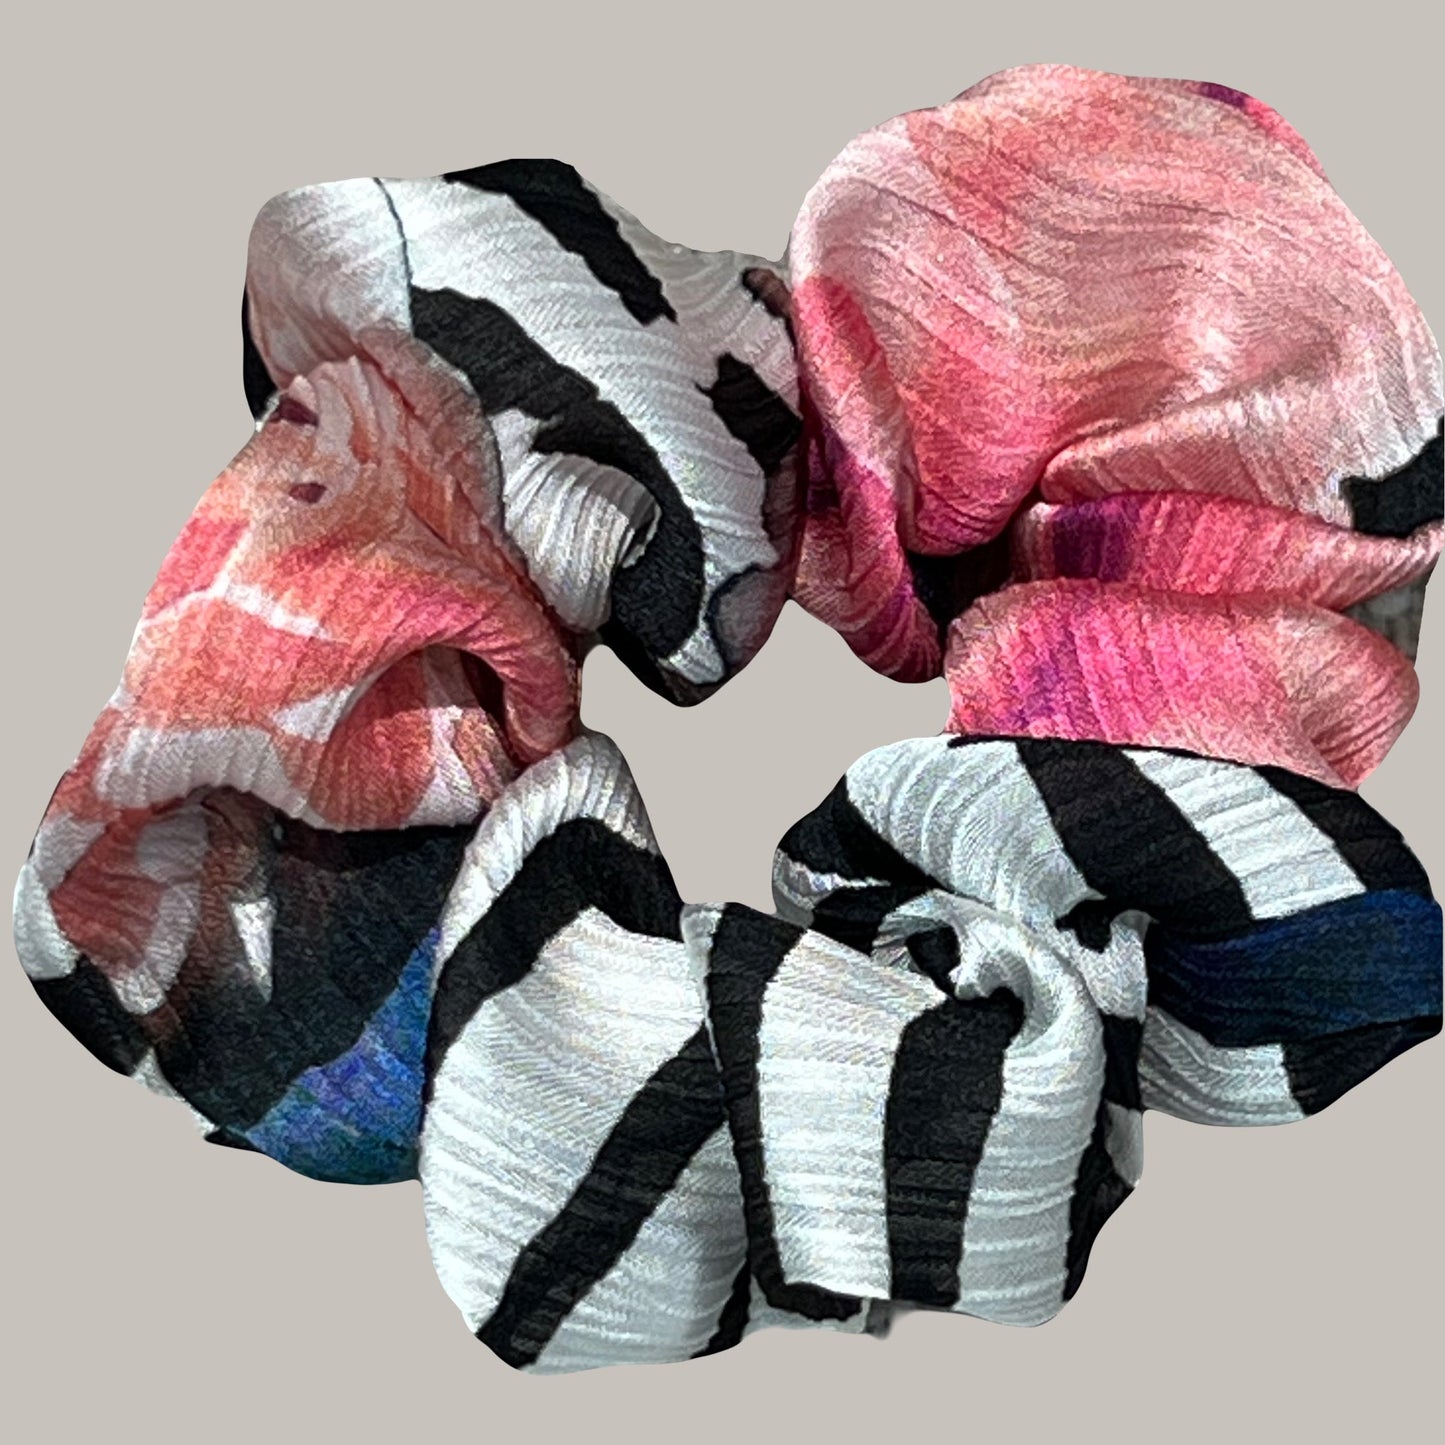 Large hair scrunchies for women made of recycled textiles 10